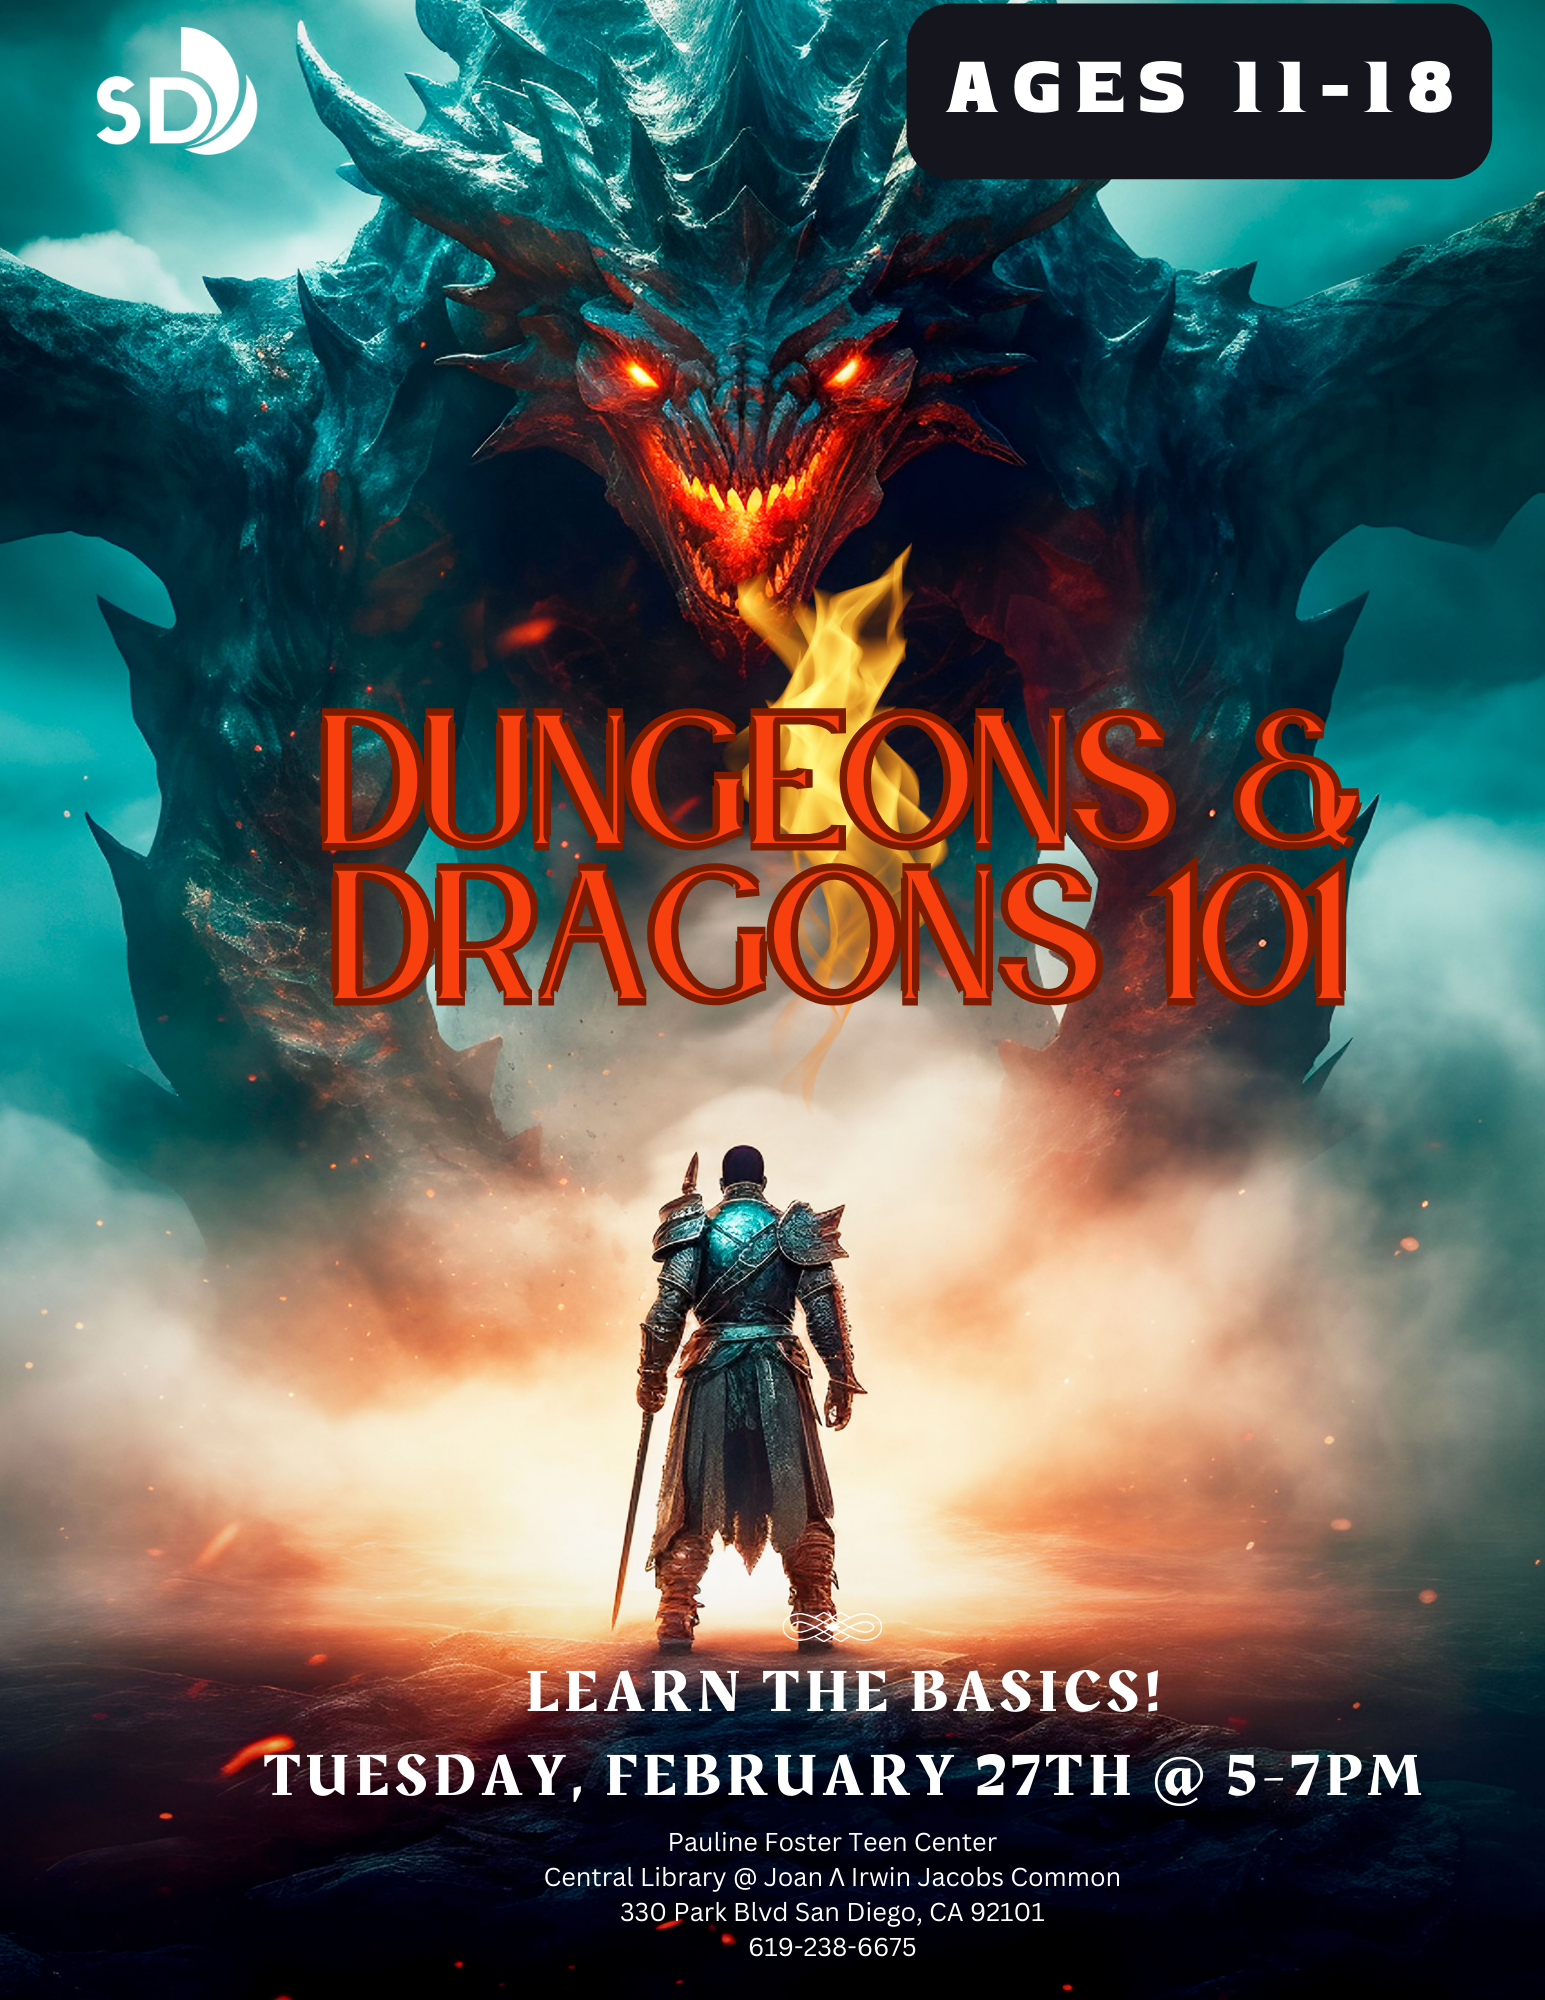 Dungeons and Dragons 101. Learn the basics. Tuesday at February 27, 5-7 PM. Pauline Foster Teen Center. Central Library. 330 Park Blvd. San Diego, CA 92101. 619-238-6675.